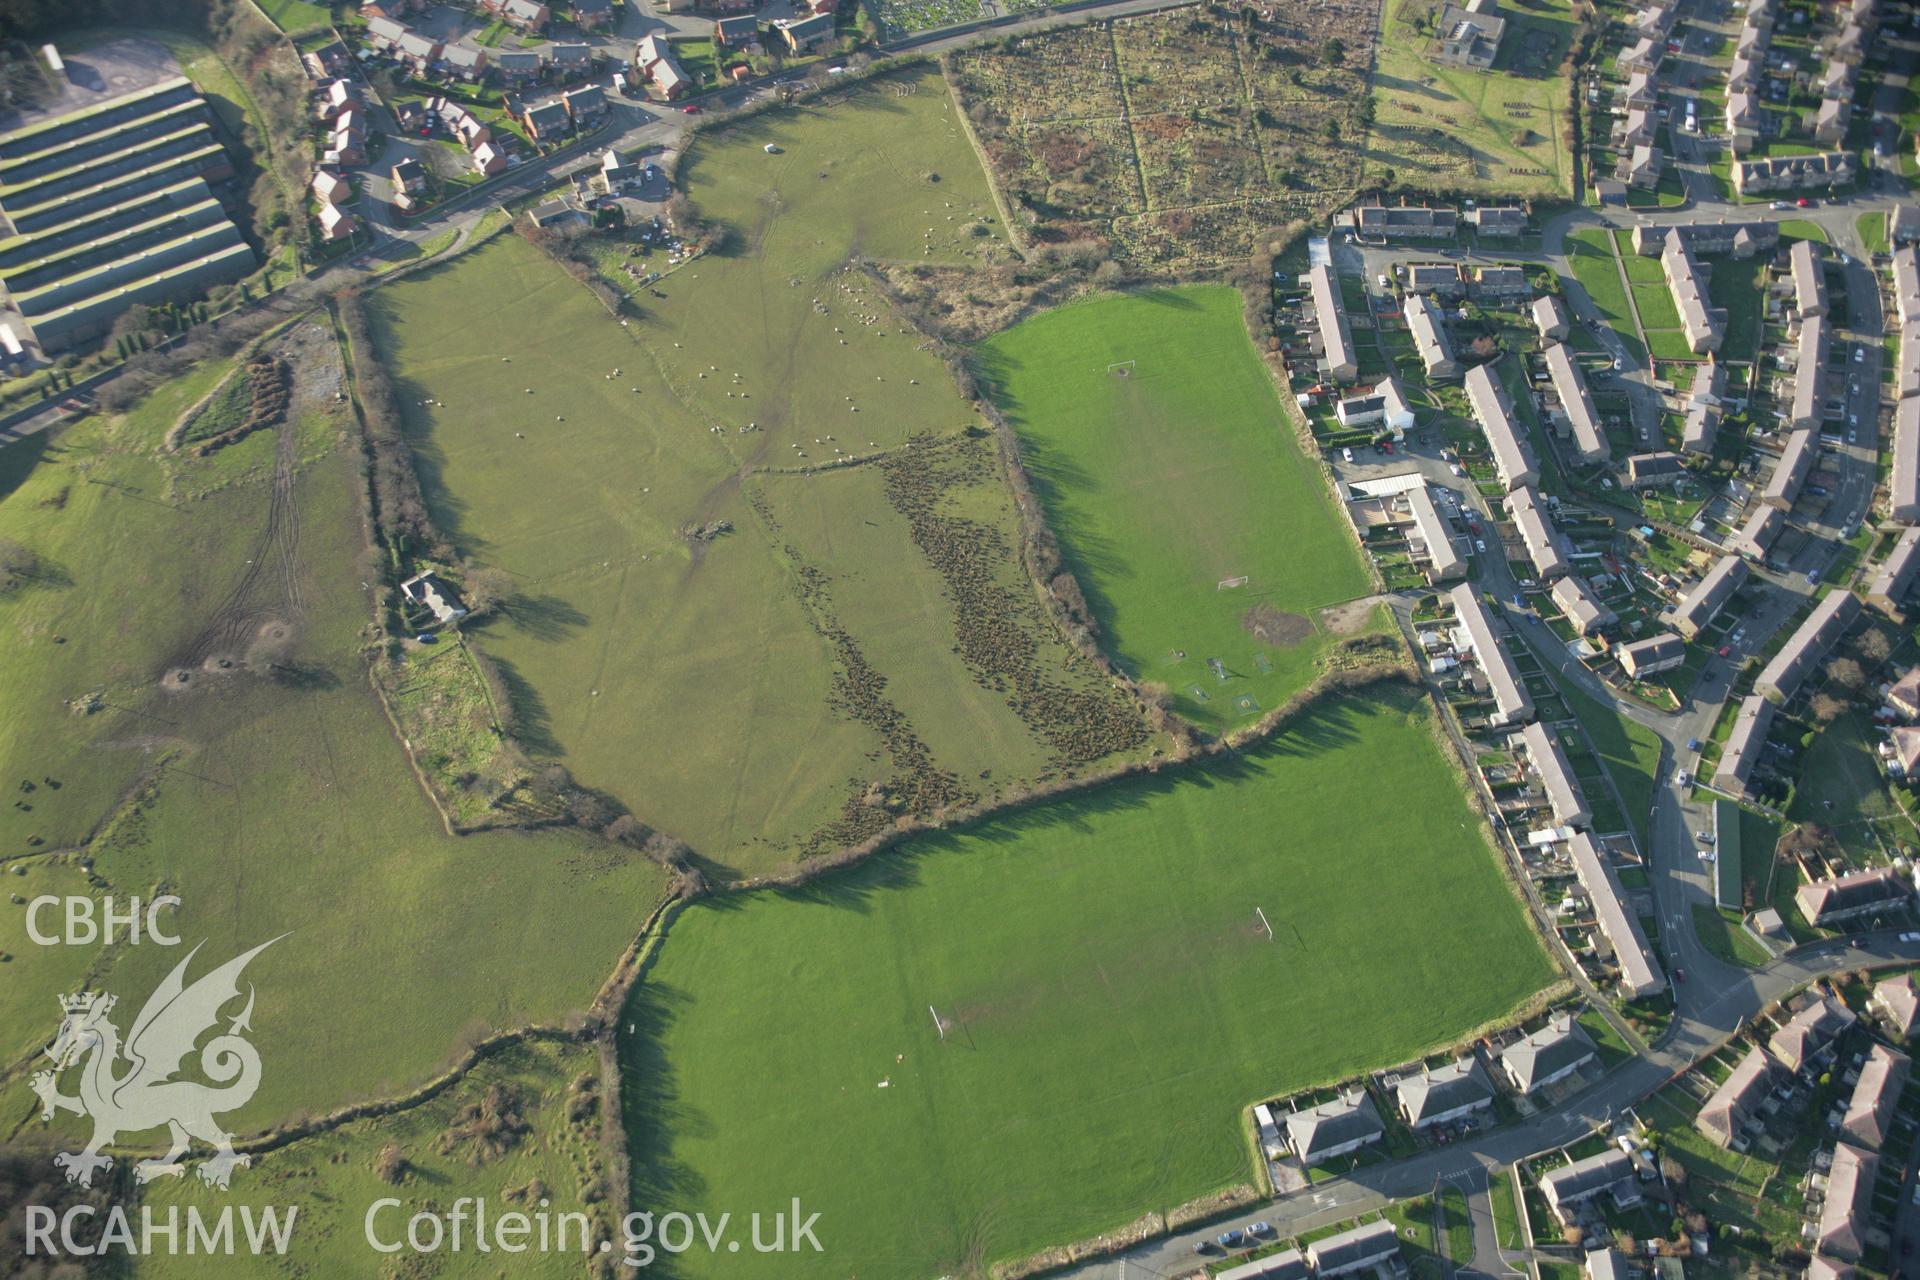 RCAHMW colour oblique aerial photograph of the Tyddyn Pandy Square Barrow Cemetery. Taken on 25 January 2007 by Toby Driver